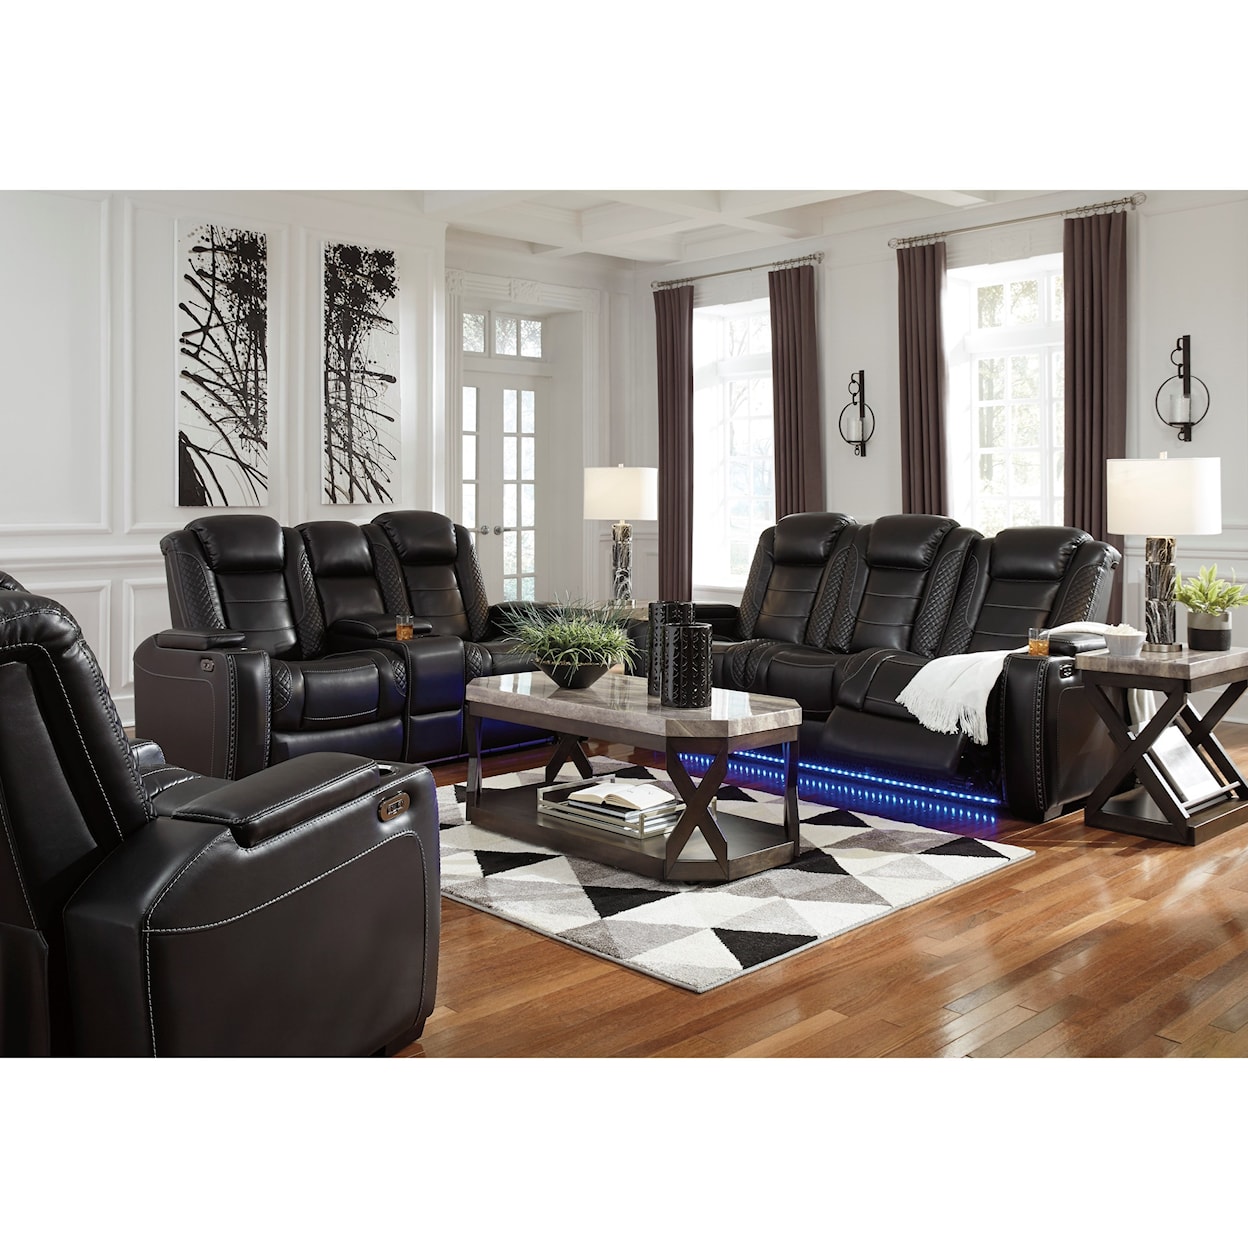 Benchcraft Party Time Power Reclining Living Room Group